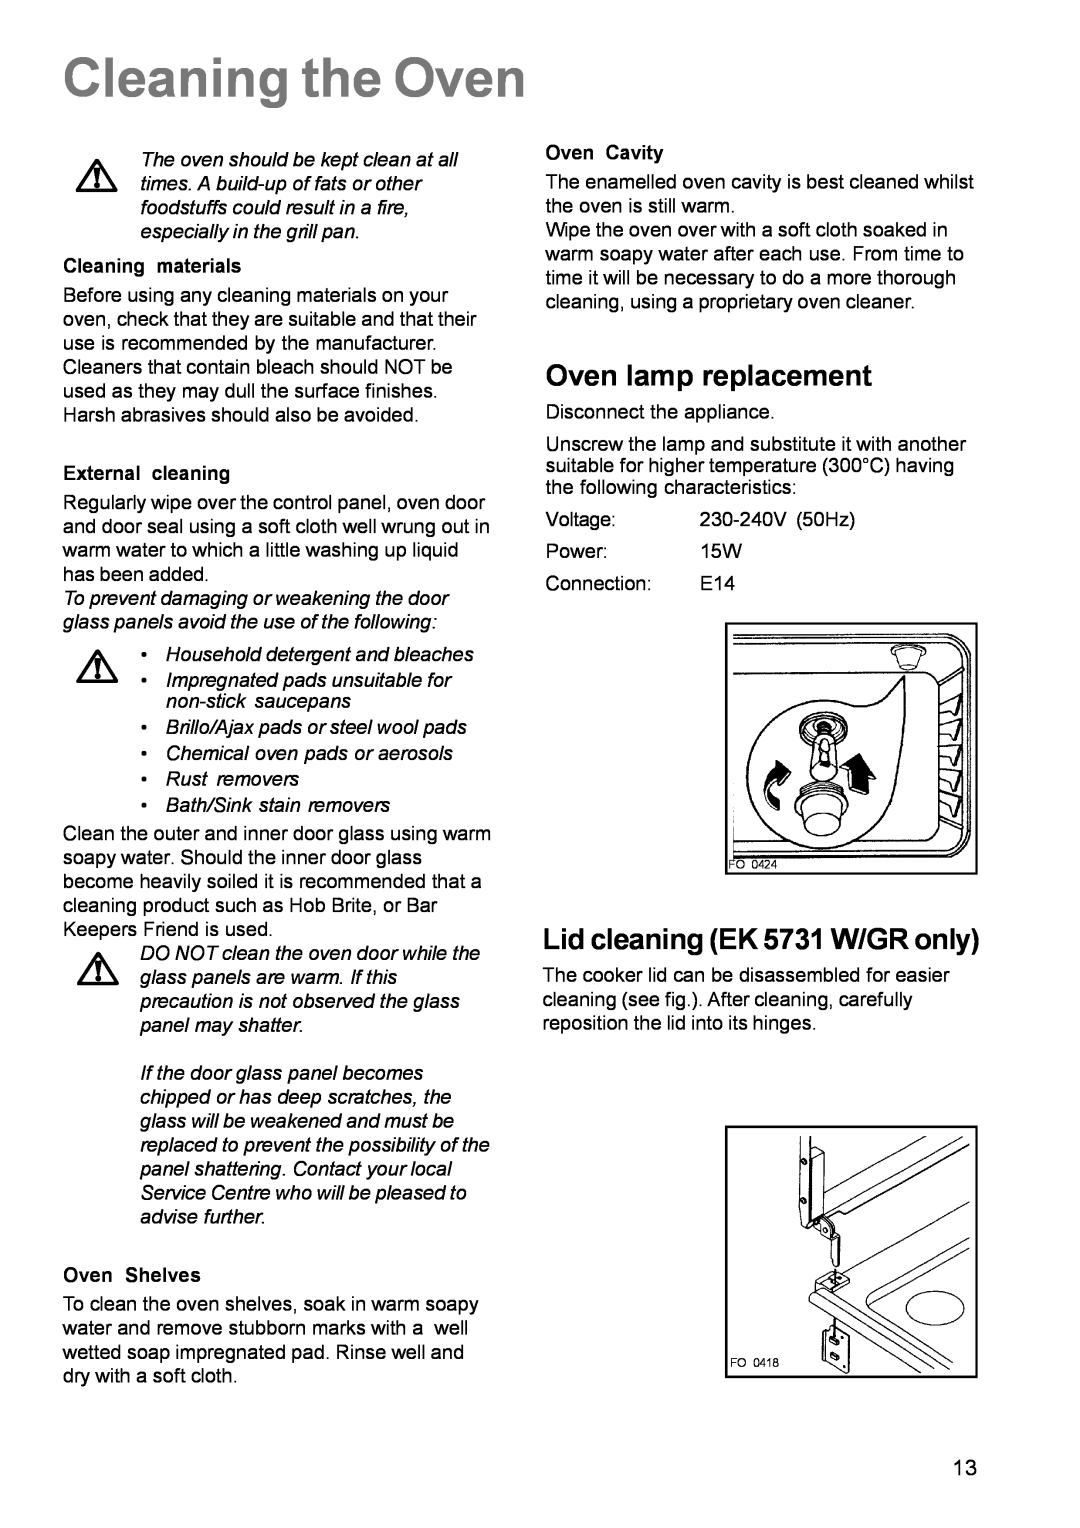 Electrolux manual Cleaning the Oven, Oven lamp replacement, Lid cleaning EK 5731 W/GR only 